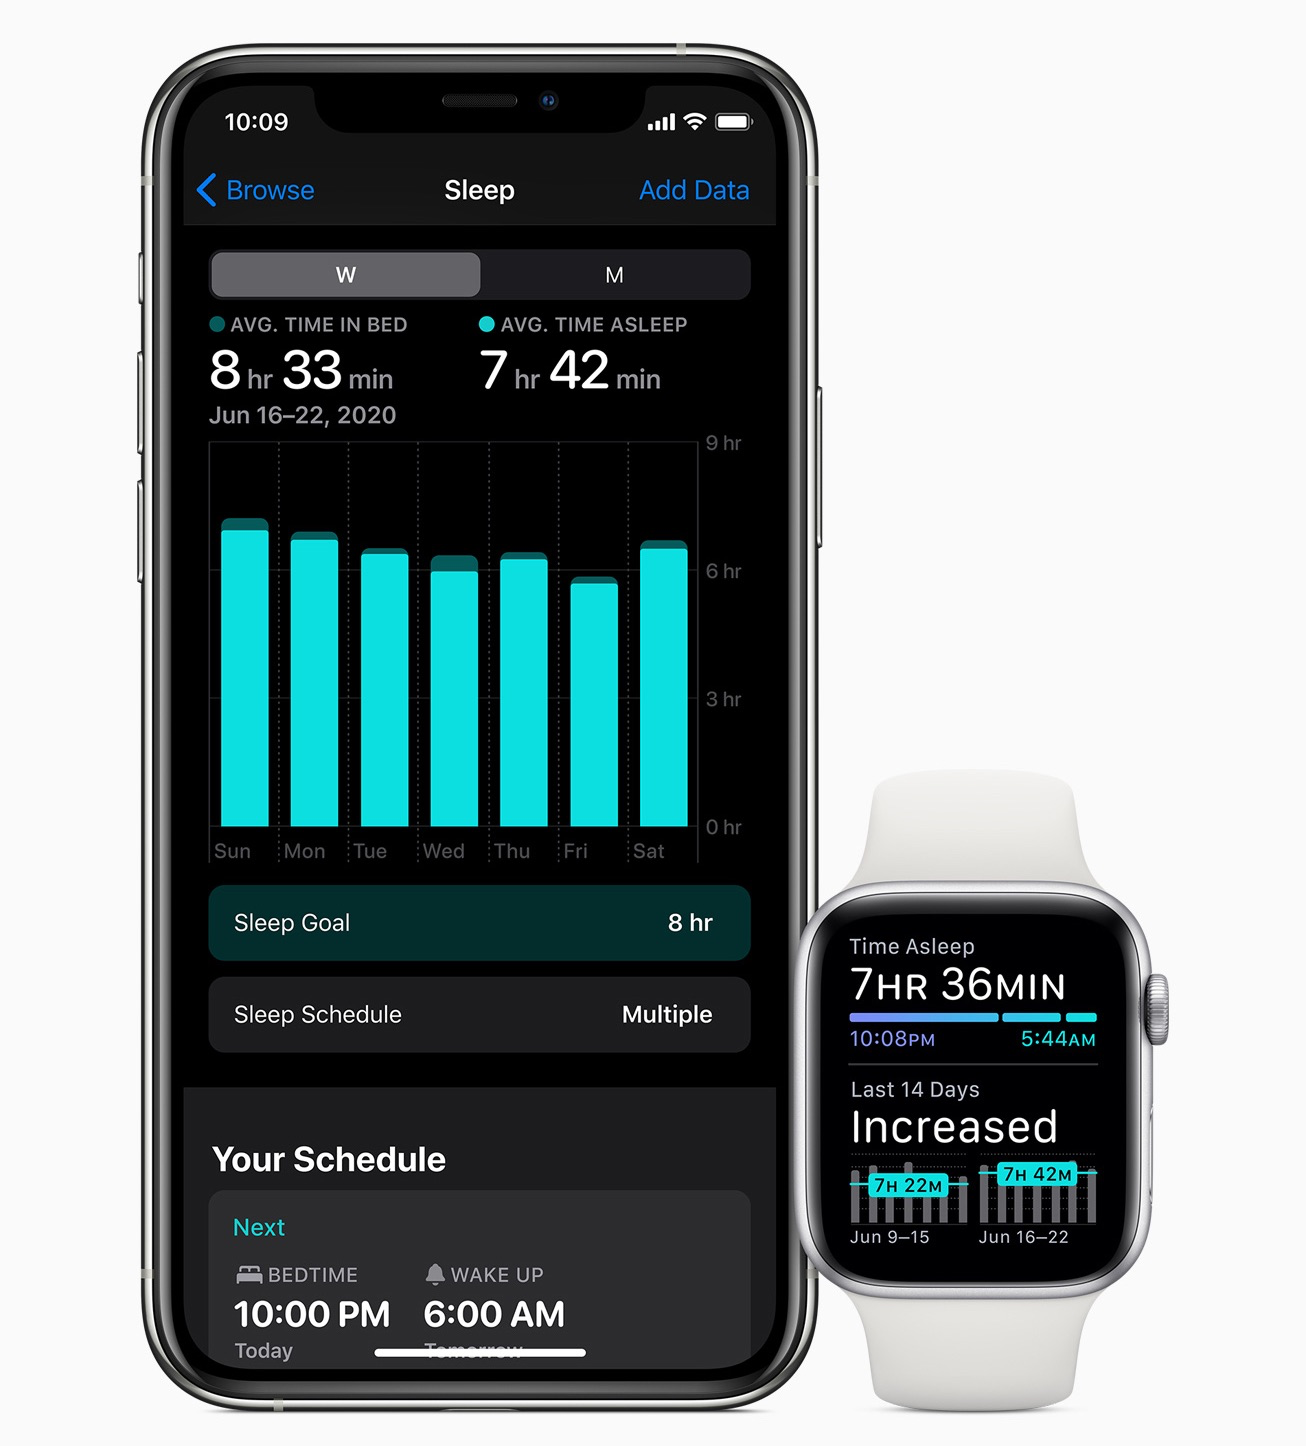 Apple's Sleep app, as well as apps on Fitbits and other devices, can help people find long-term sleep routines that work for them. Stock photo.